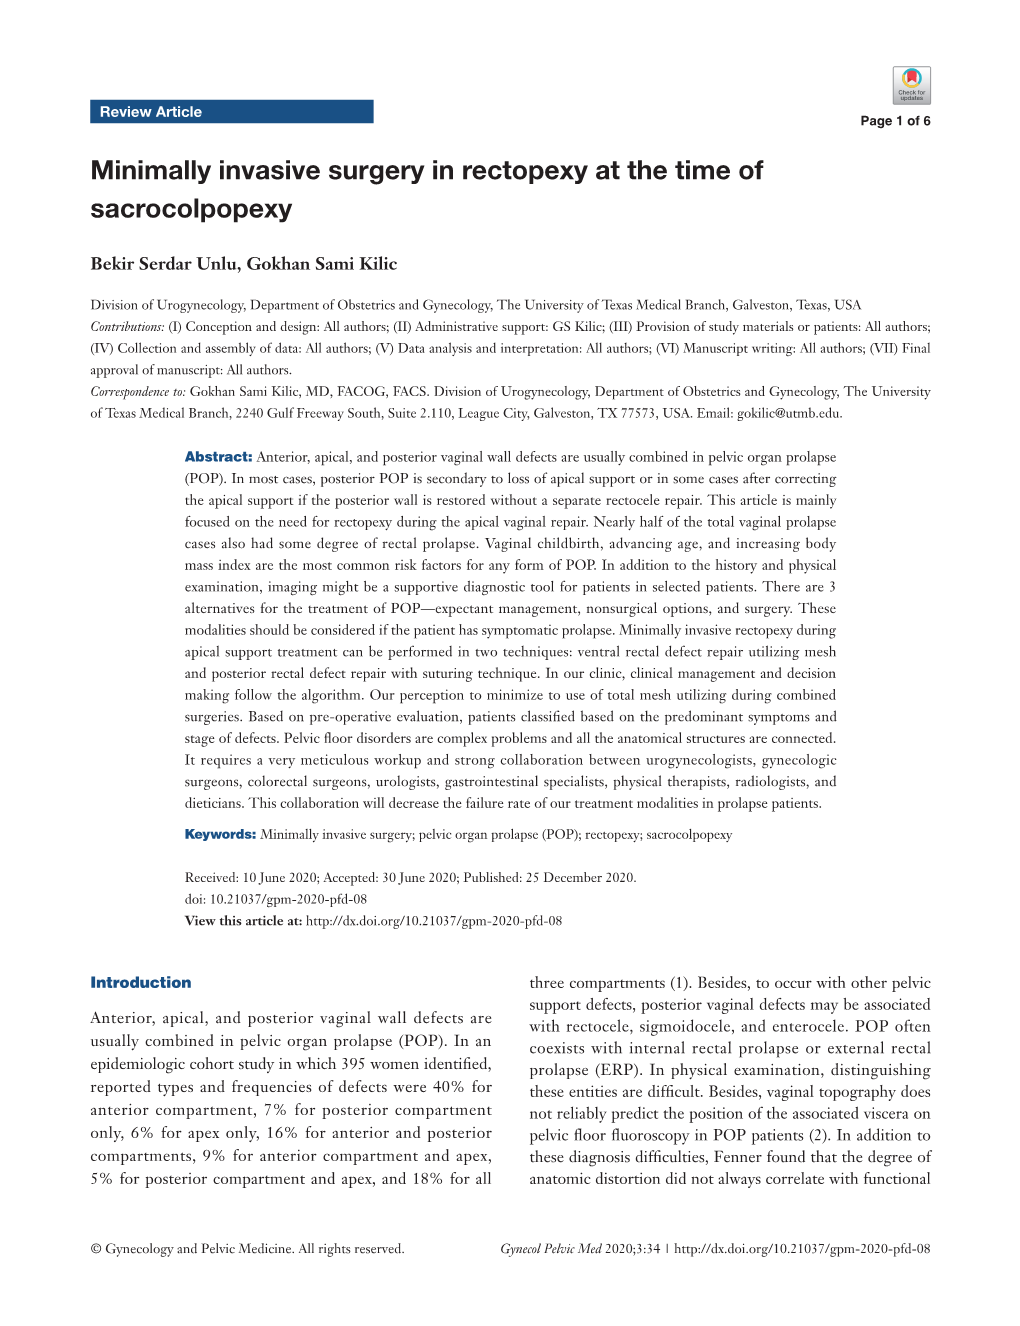 Minimally Invasive Surgery in Rectopexy at the Time of Sacrocolpopexy